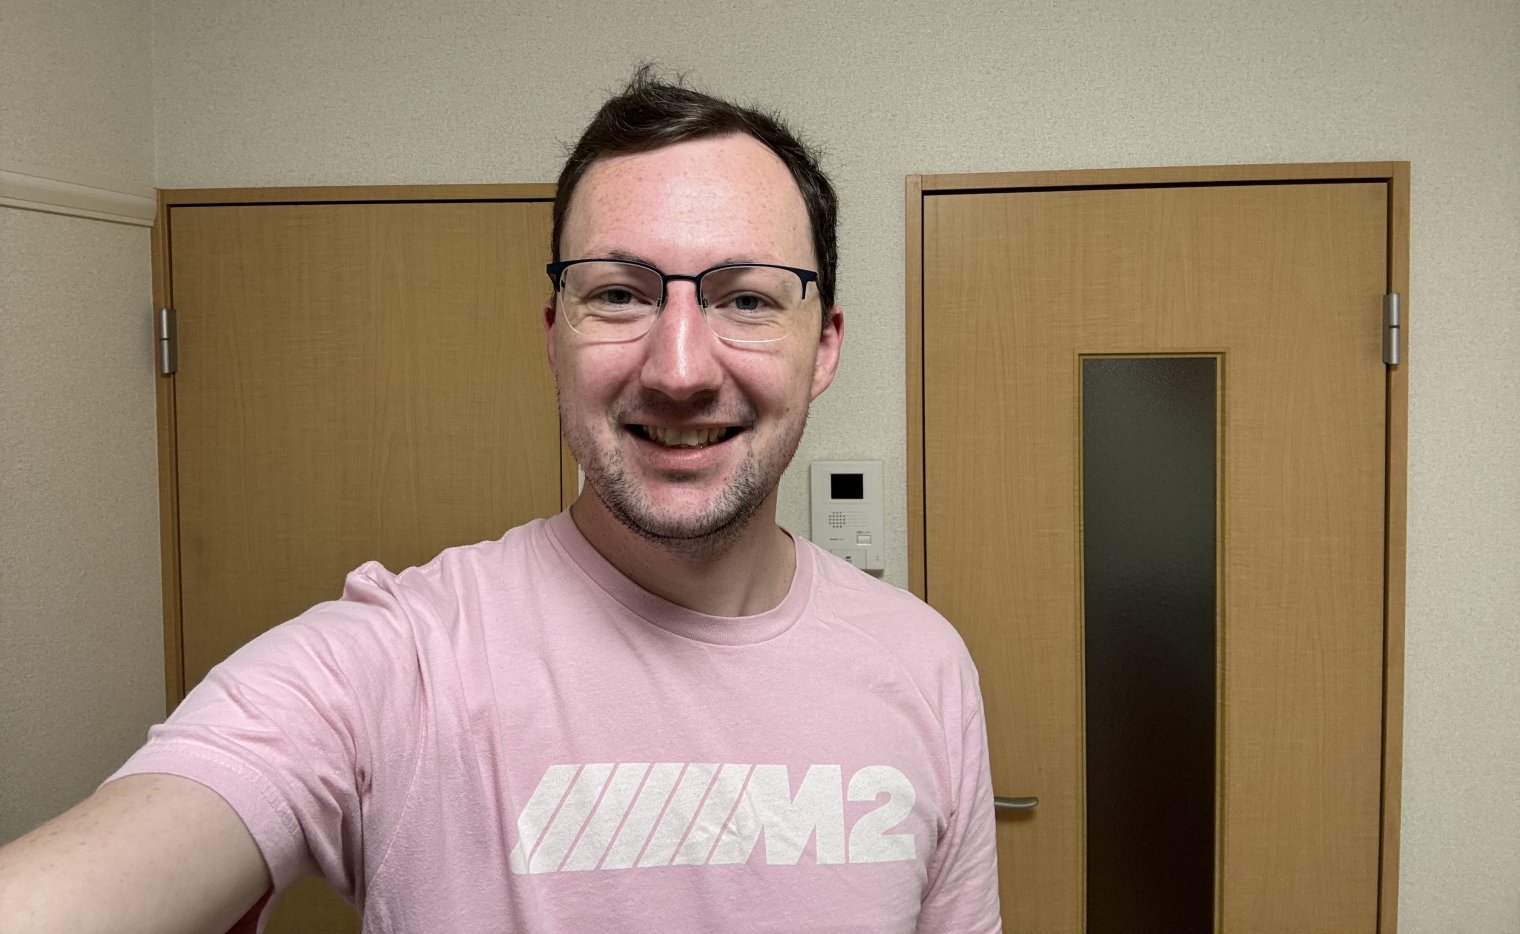 A surprisingly decent selfie with the classic pink M2 tee